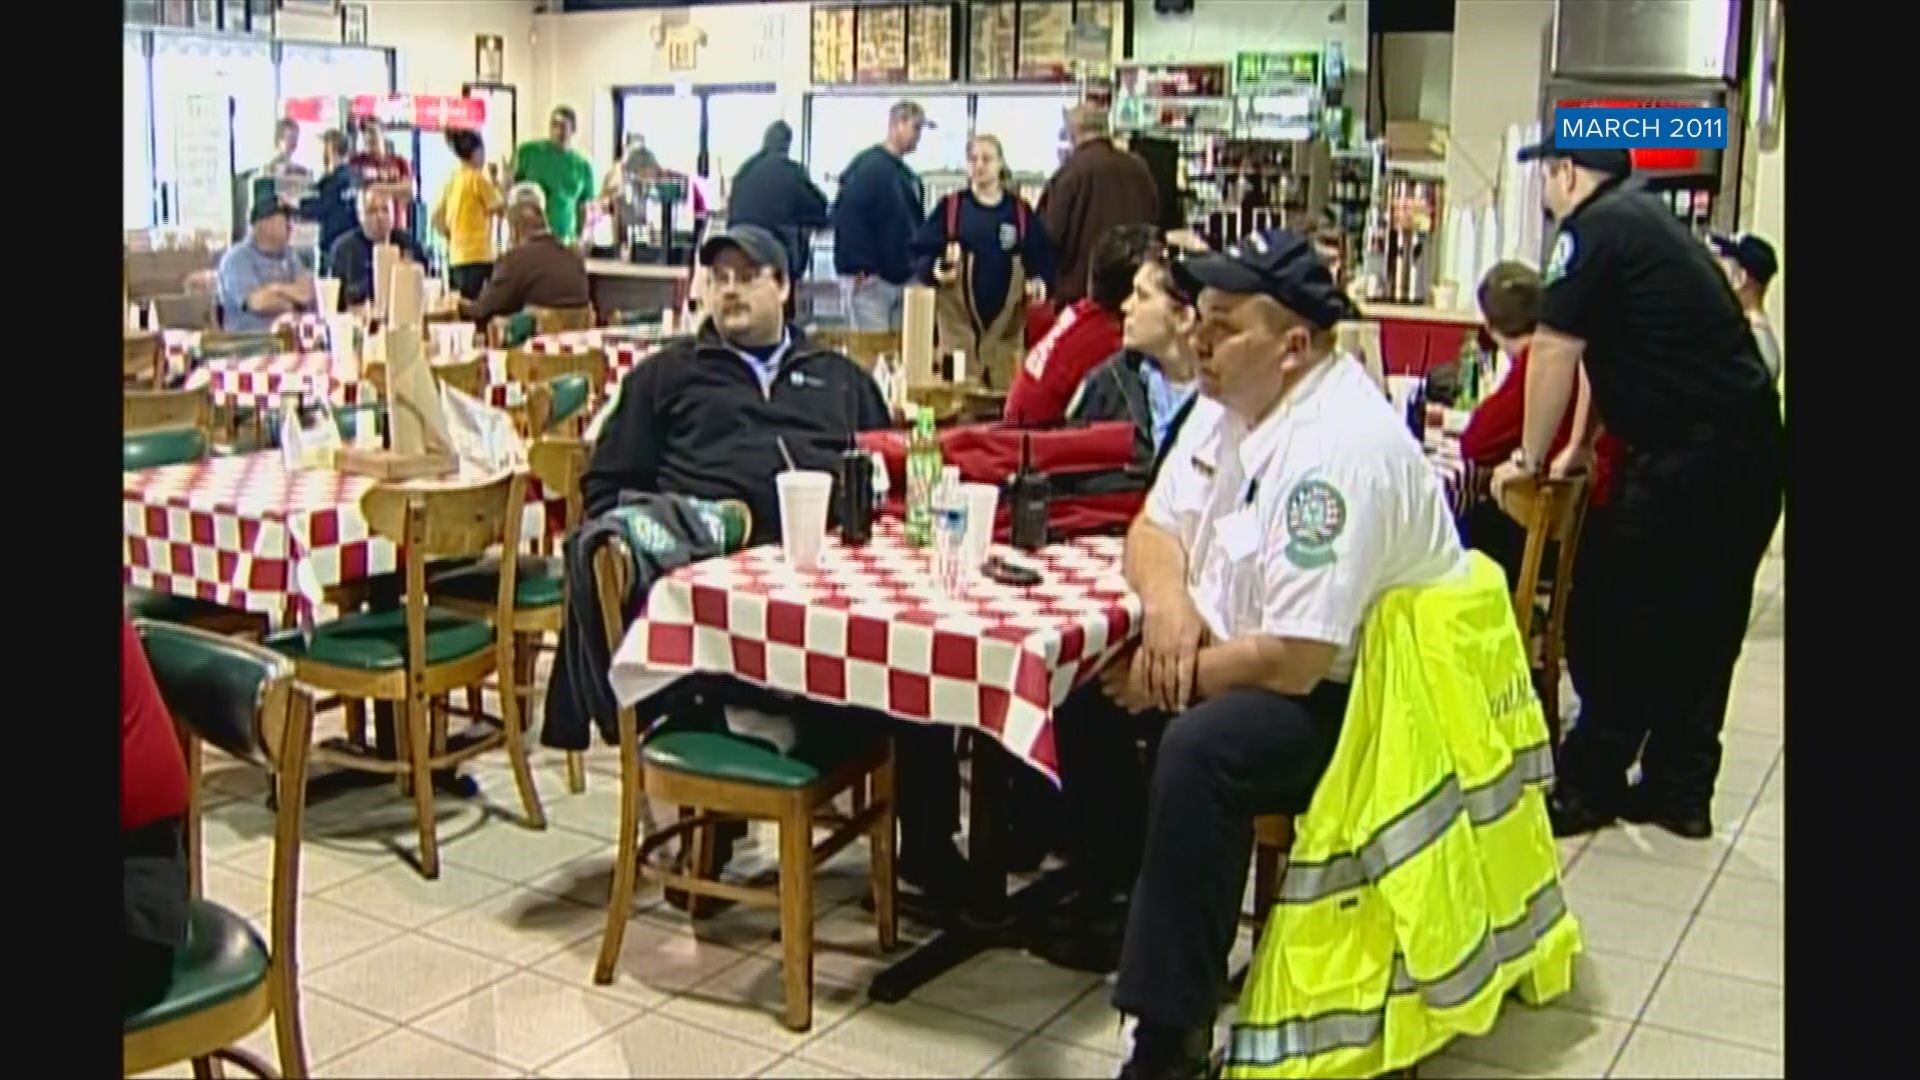 Agencies from across East Tennessee worked out of the diner after the March 23, 2011, tornado that struck Loudon County.